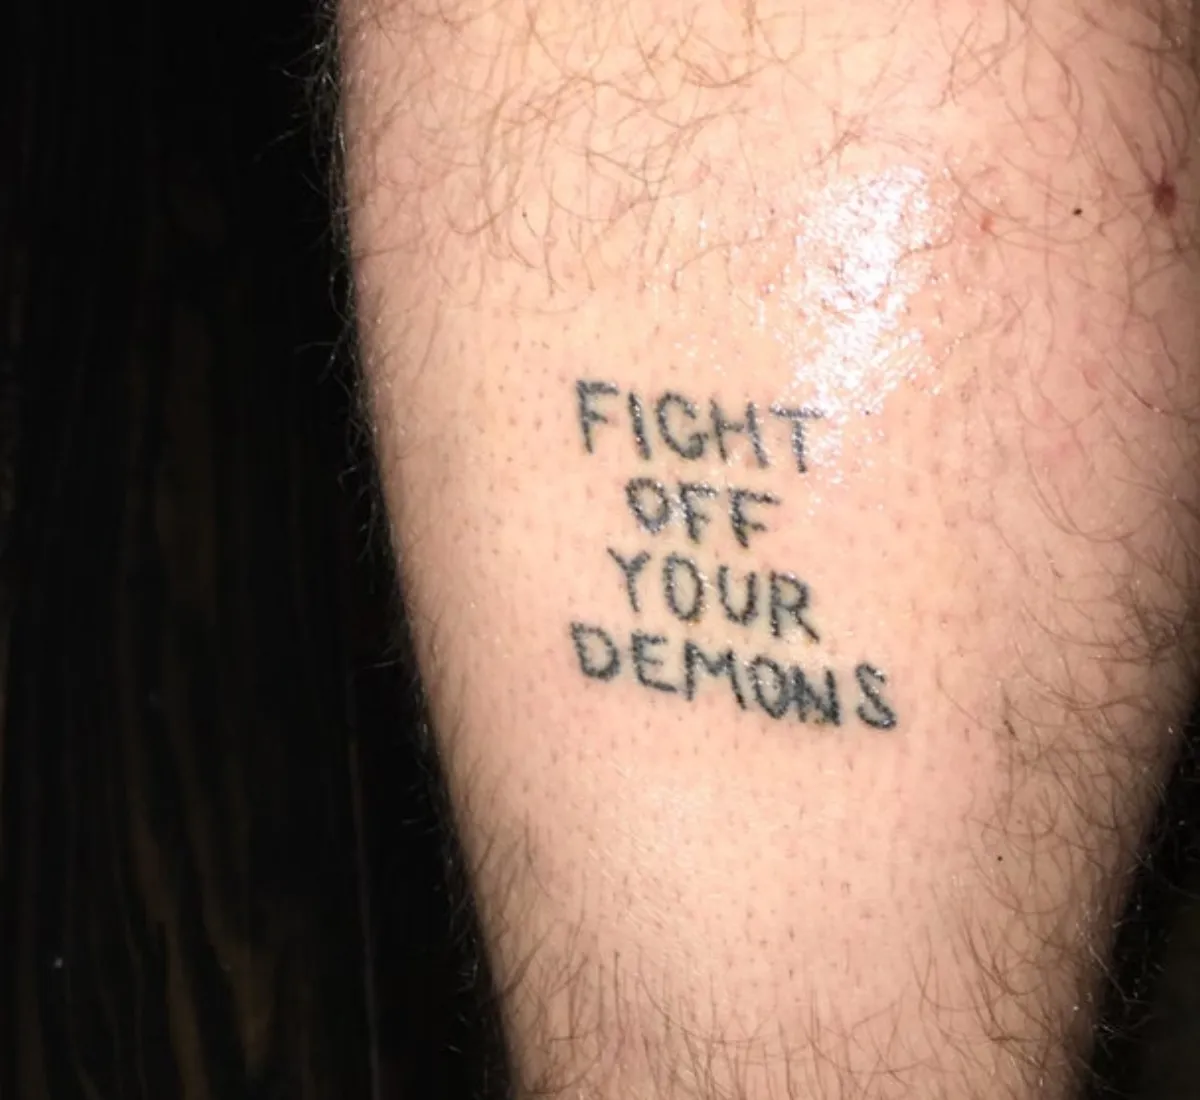 fight off your demons tat